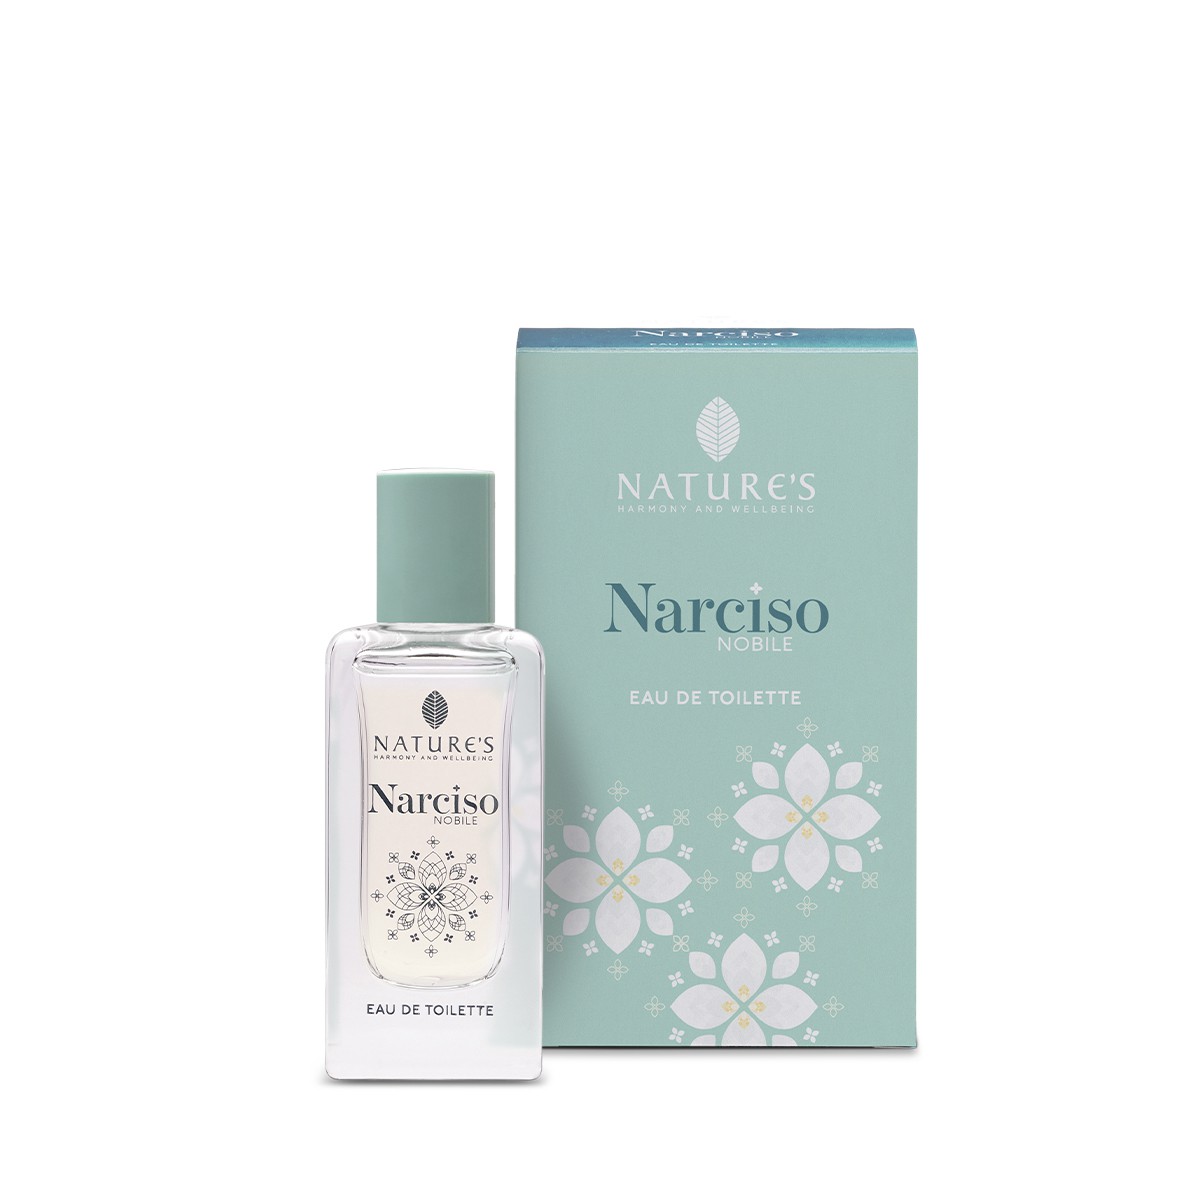 NATURE'S NARCISO NOBILE EDT 50ML